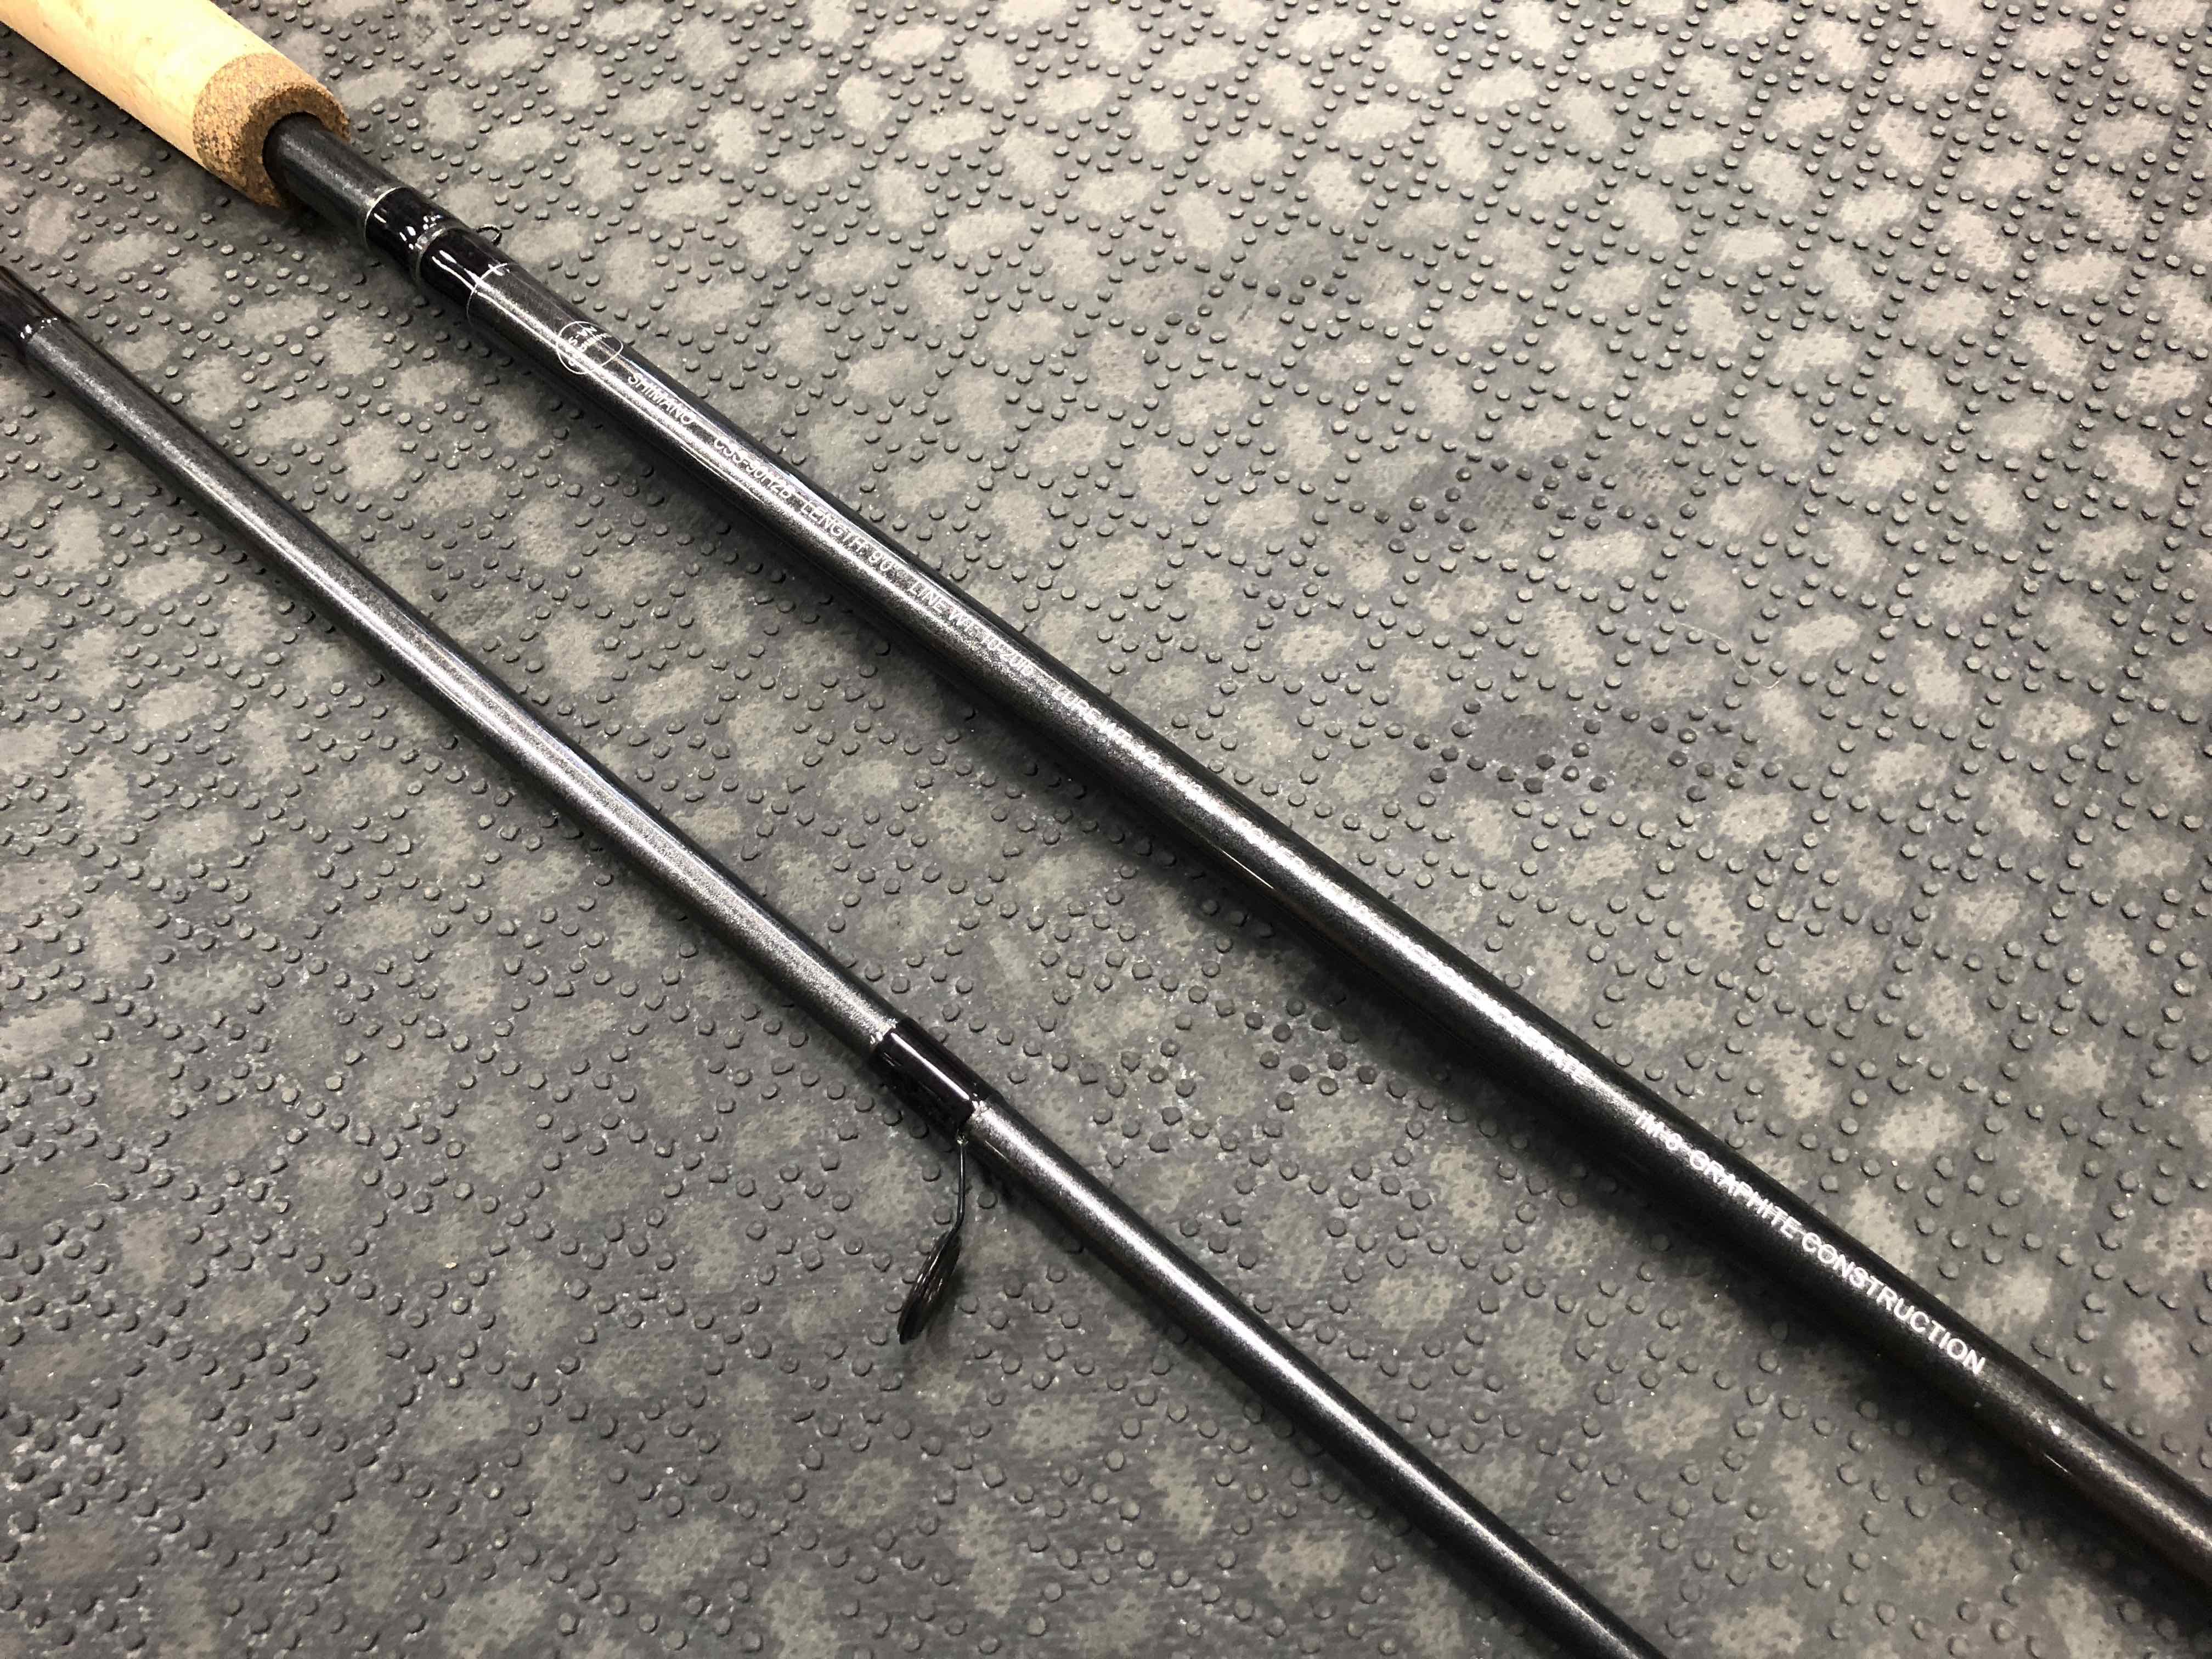 Shimano Clarus - CSS90-H2B Spinning Rod - 2Pc - LIKE NEW! - $70